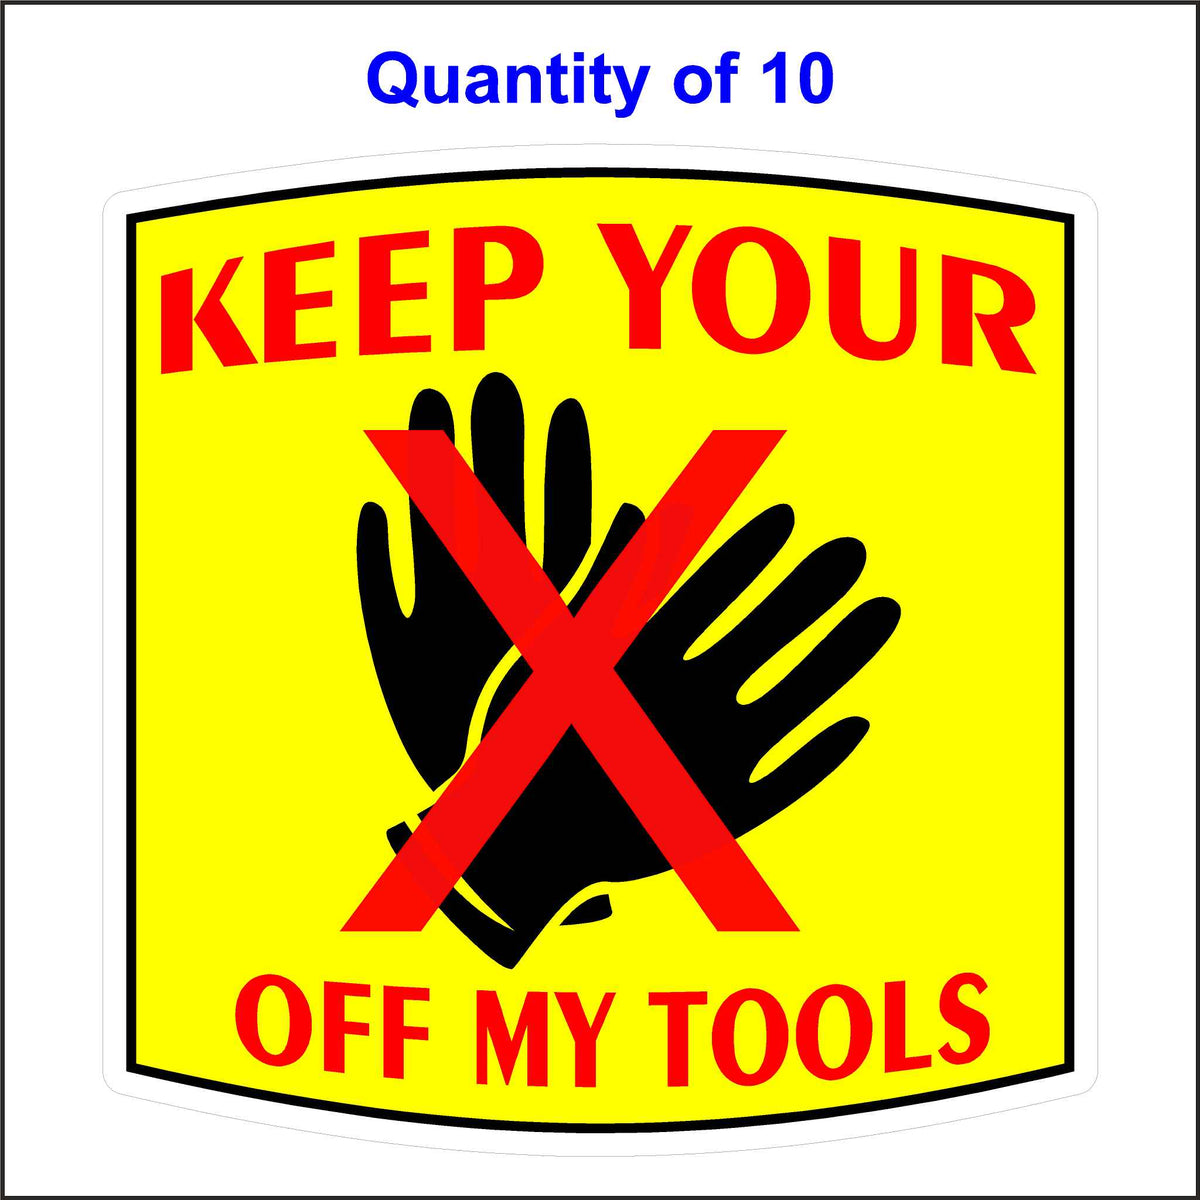 Keep Your Hands off My Tools Sticker. Yellow Background, Black Hands and Red Lettering. 10 Quantity.